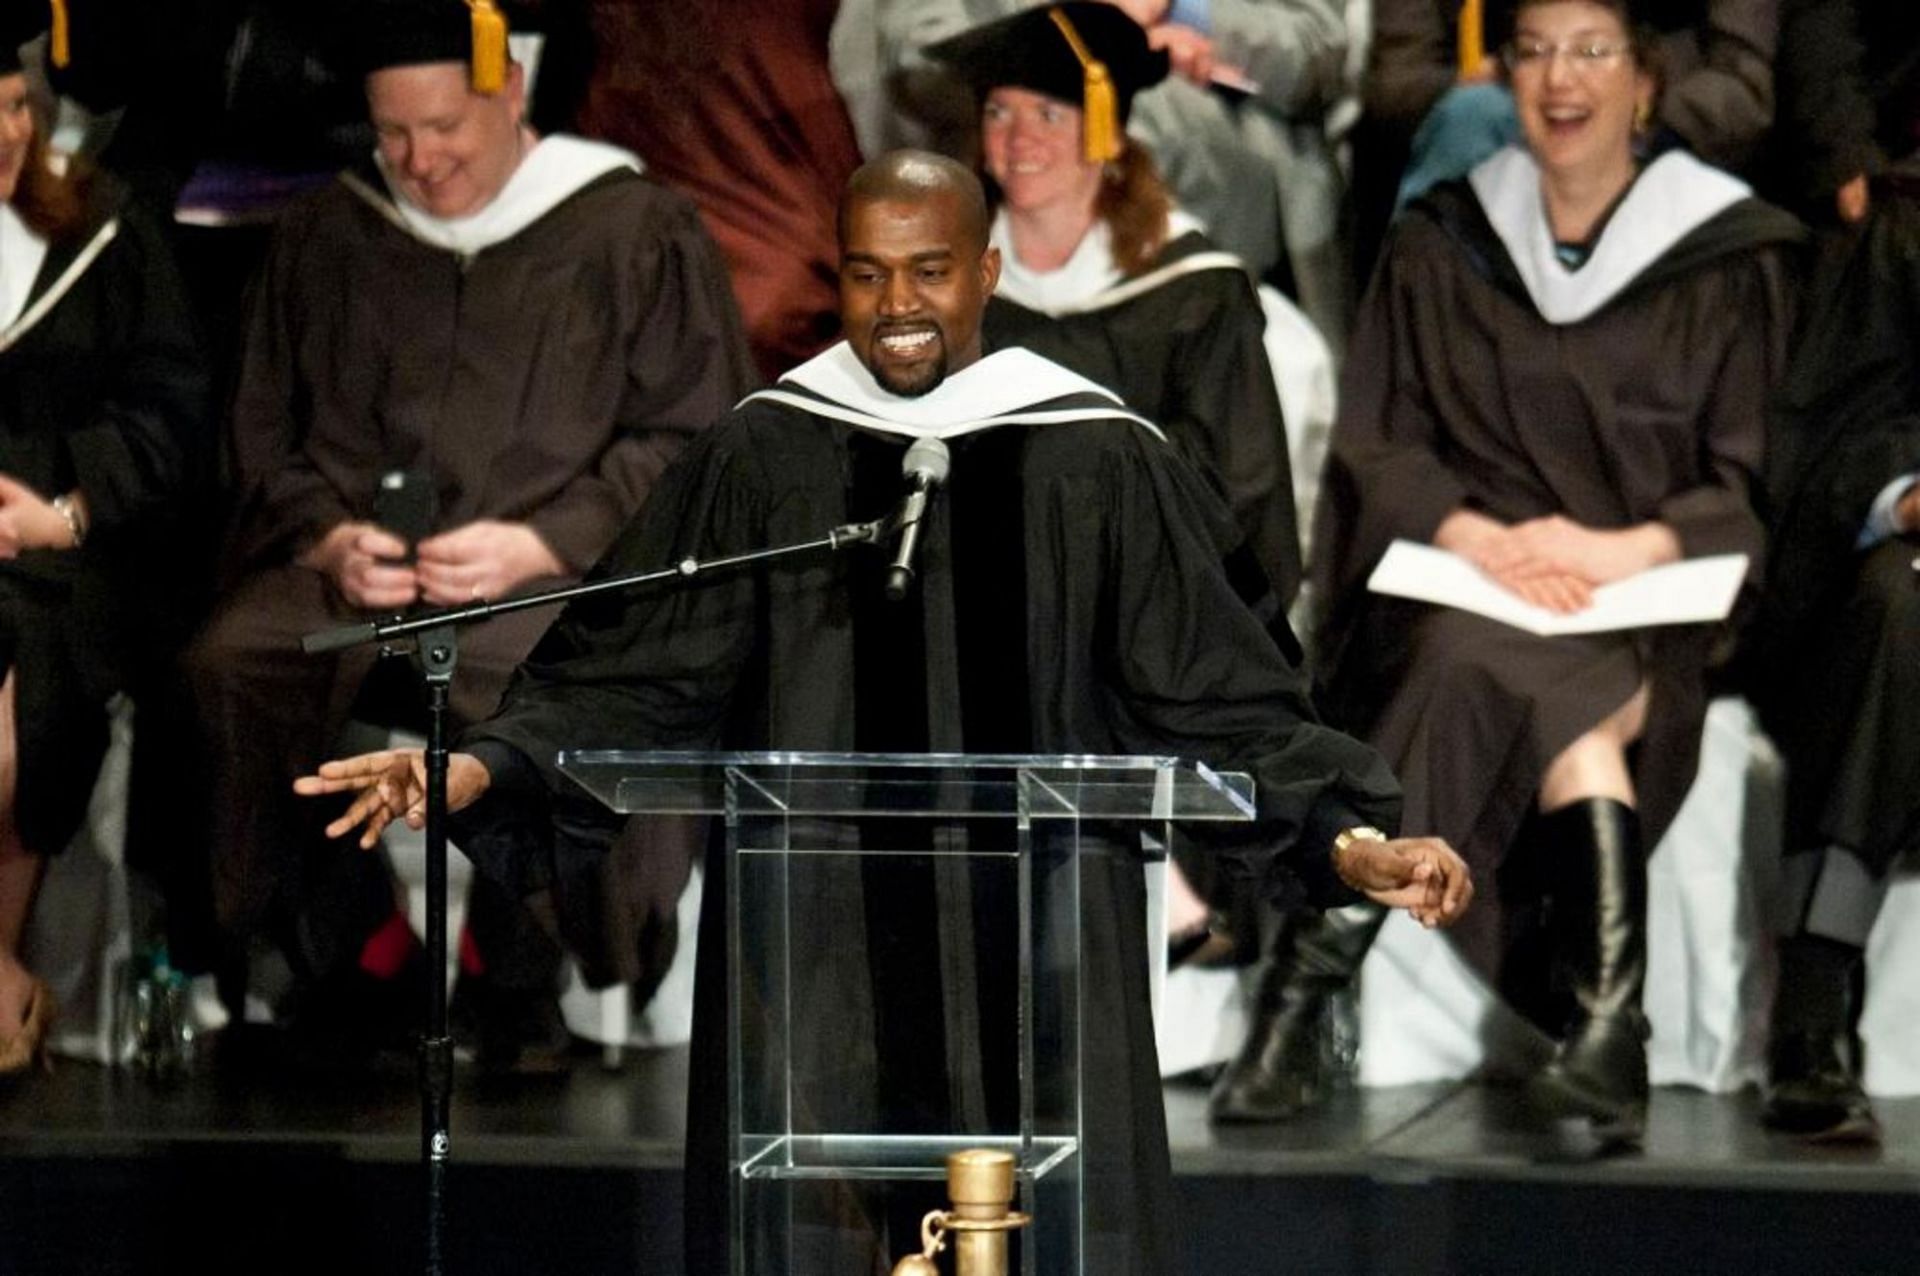 The rapper was honored with the degree in 2015 (Image via Getty Images)